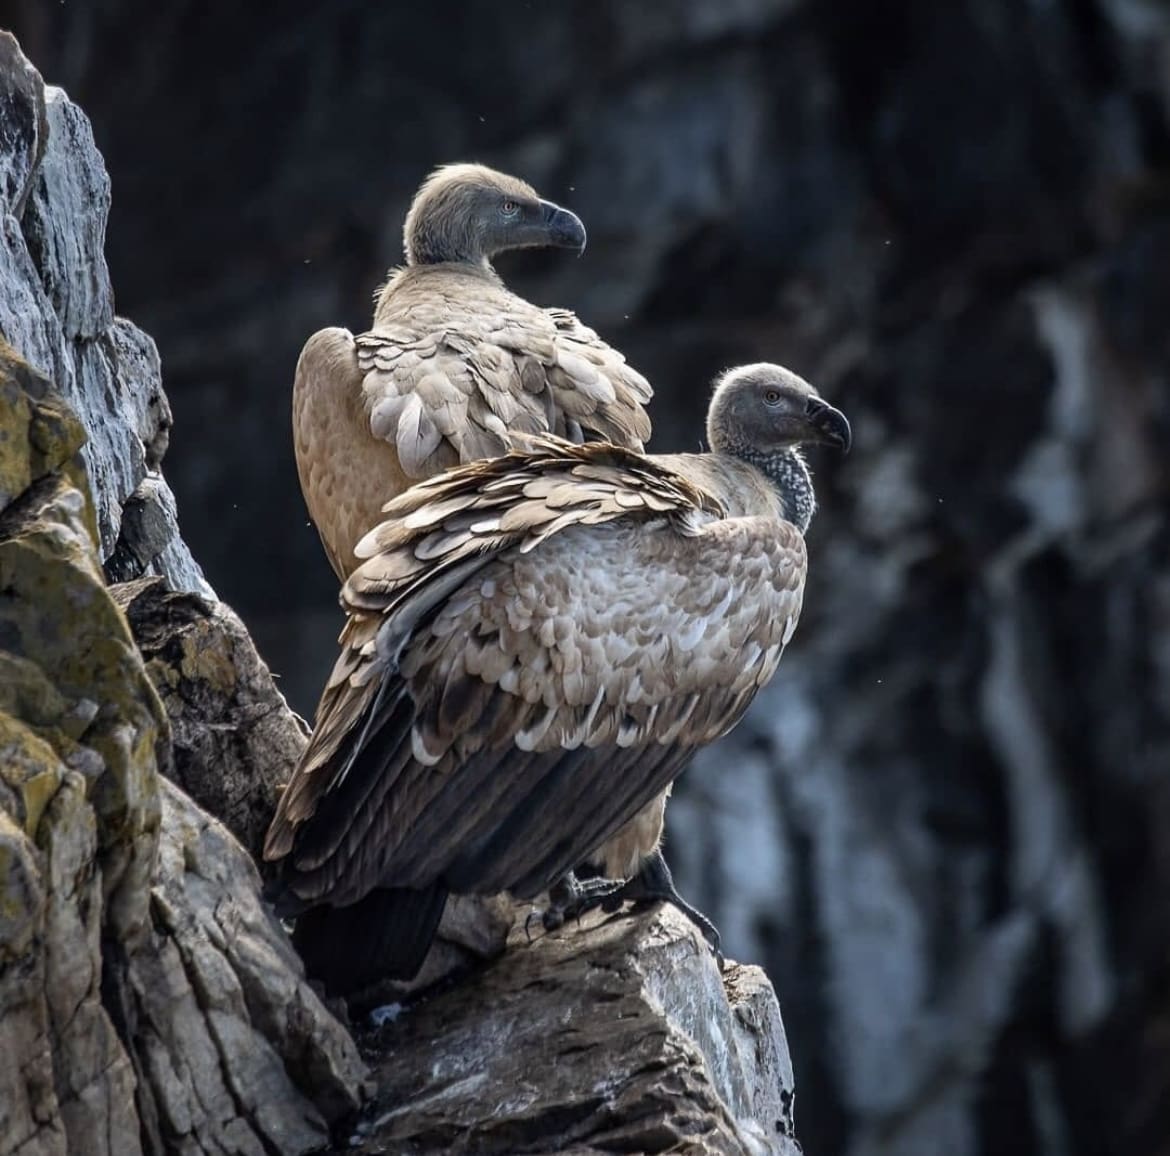 A pair of Cape Vultures resting on a rocky cliff